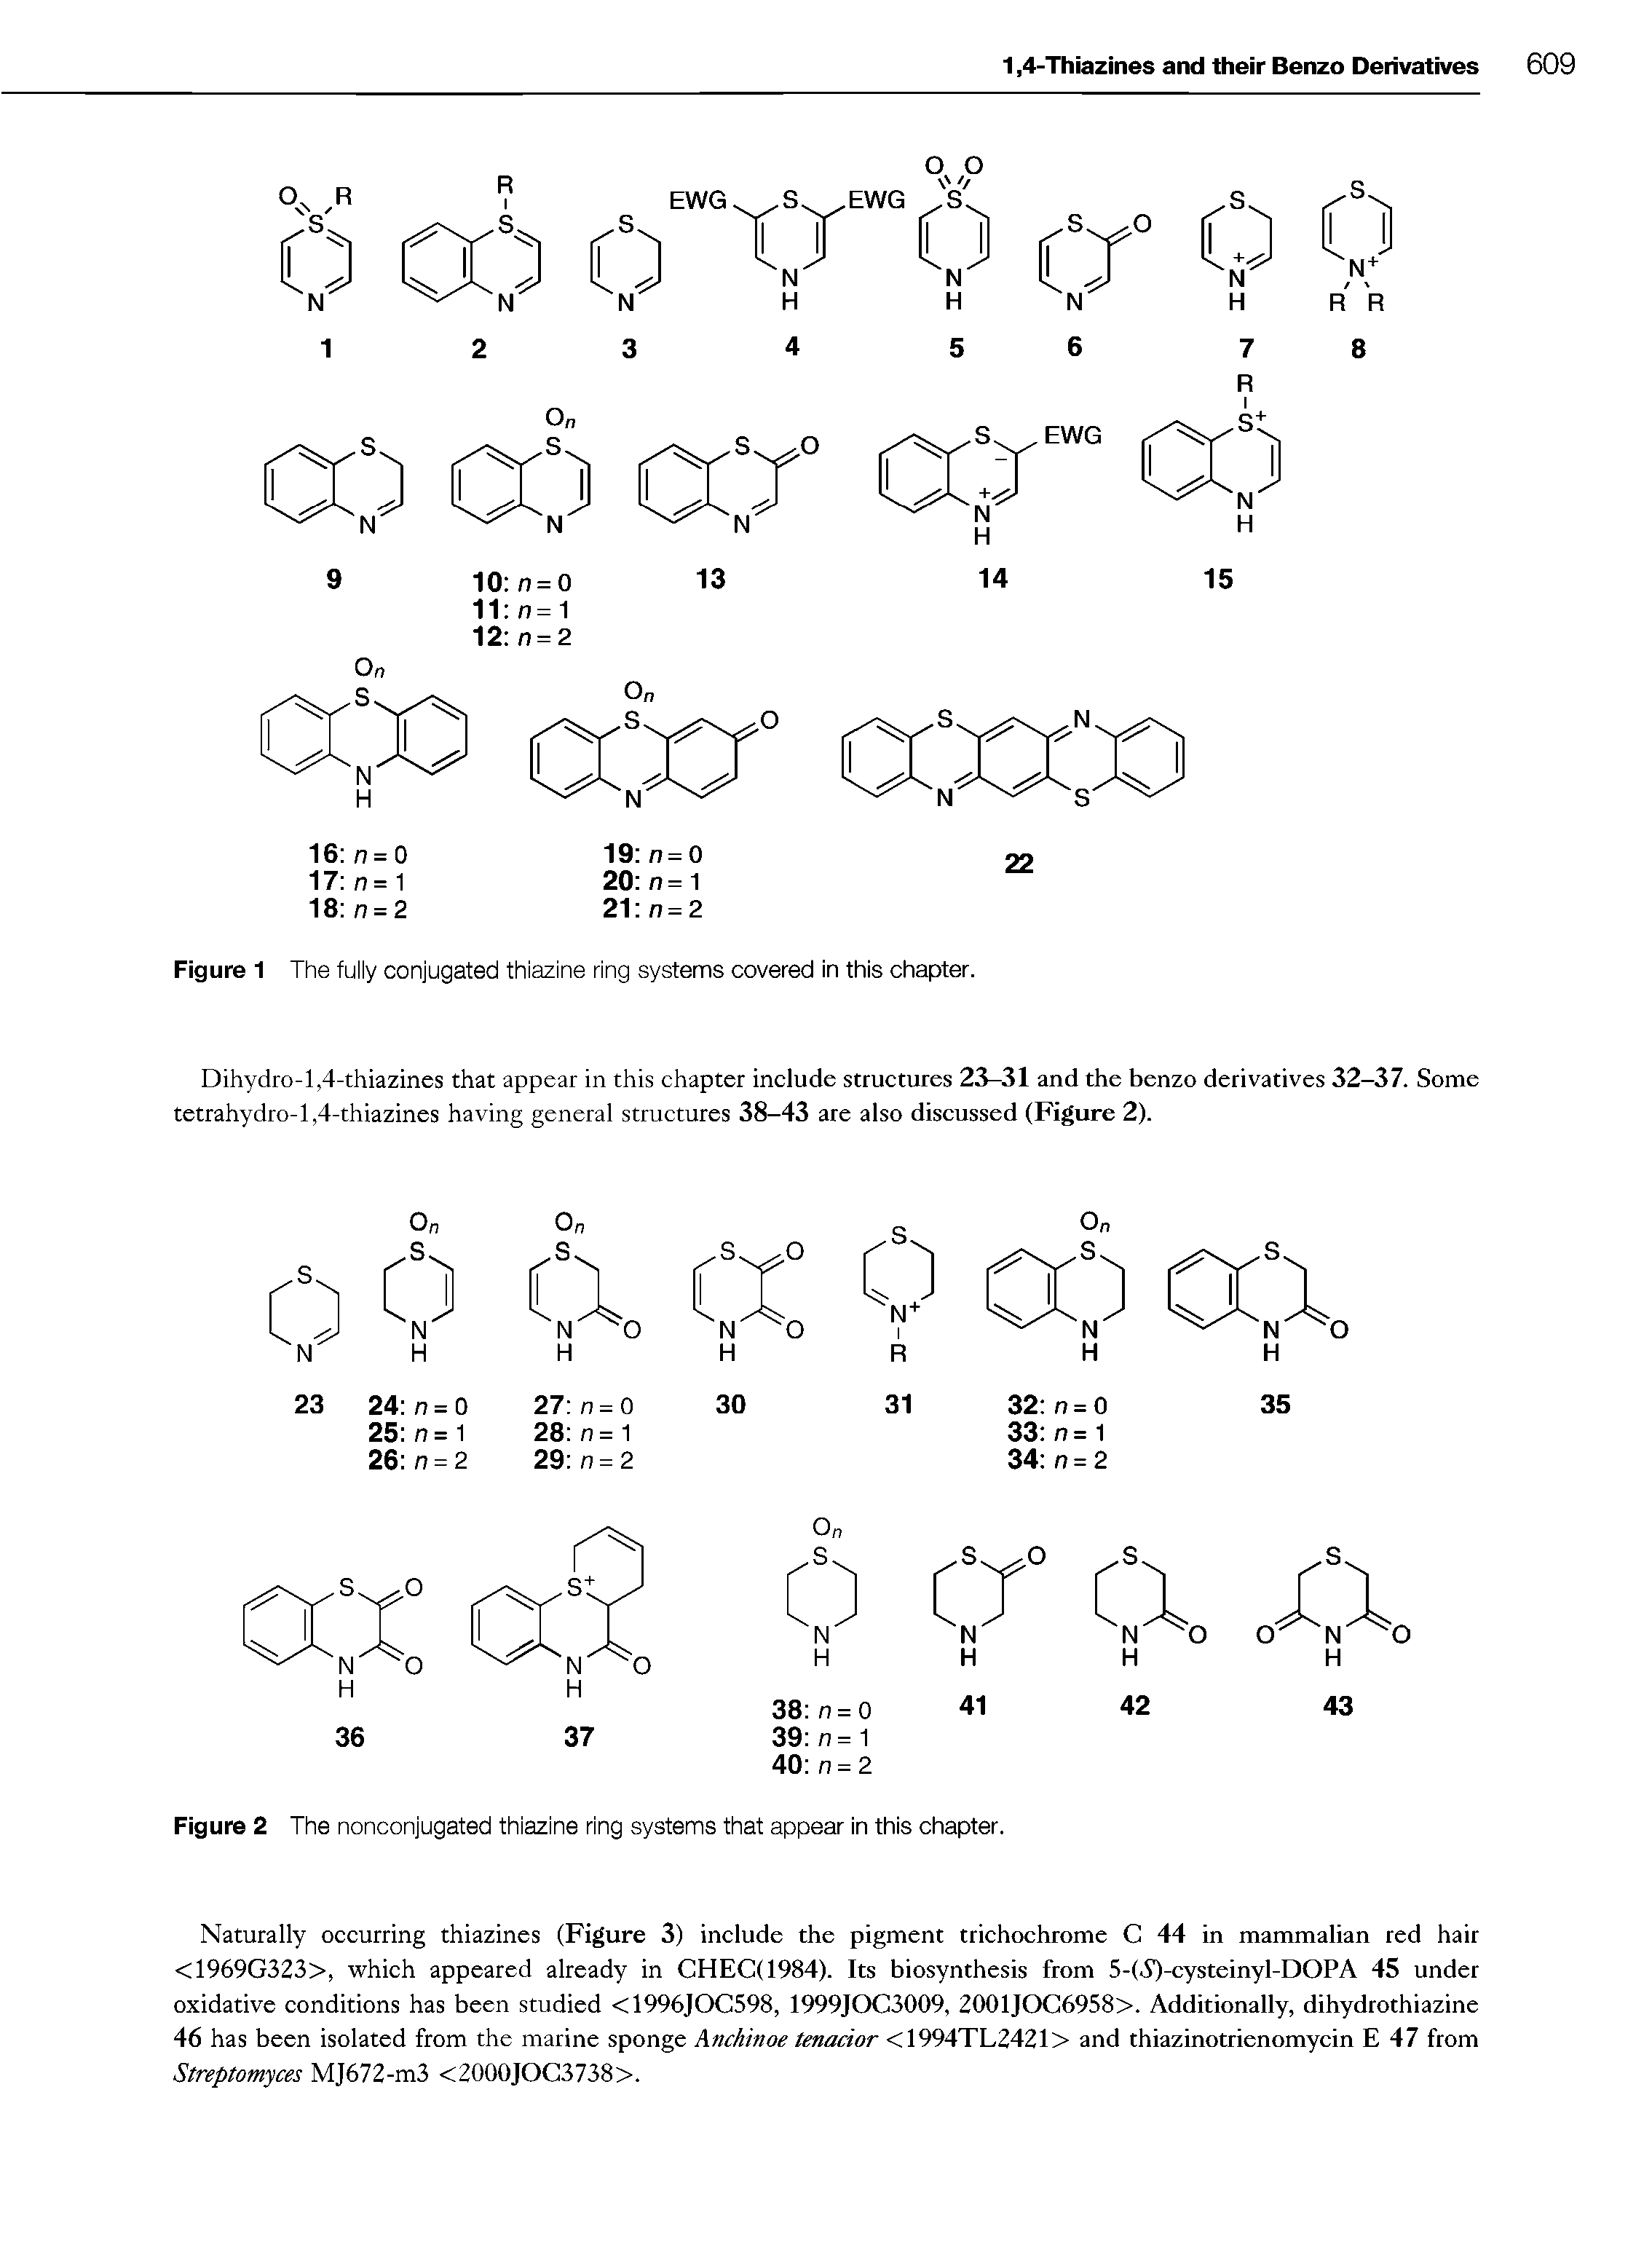 Figure 1 The fully conjugated thiazine ring systems covered in this chapter.